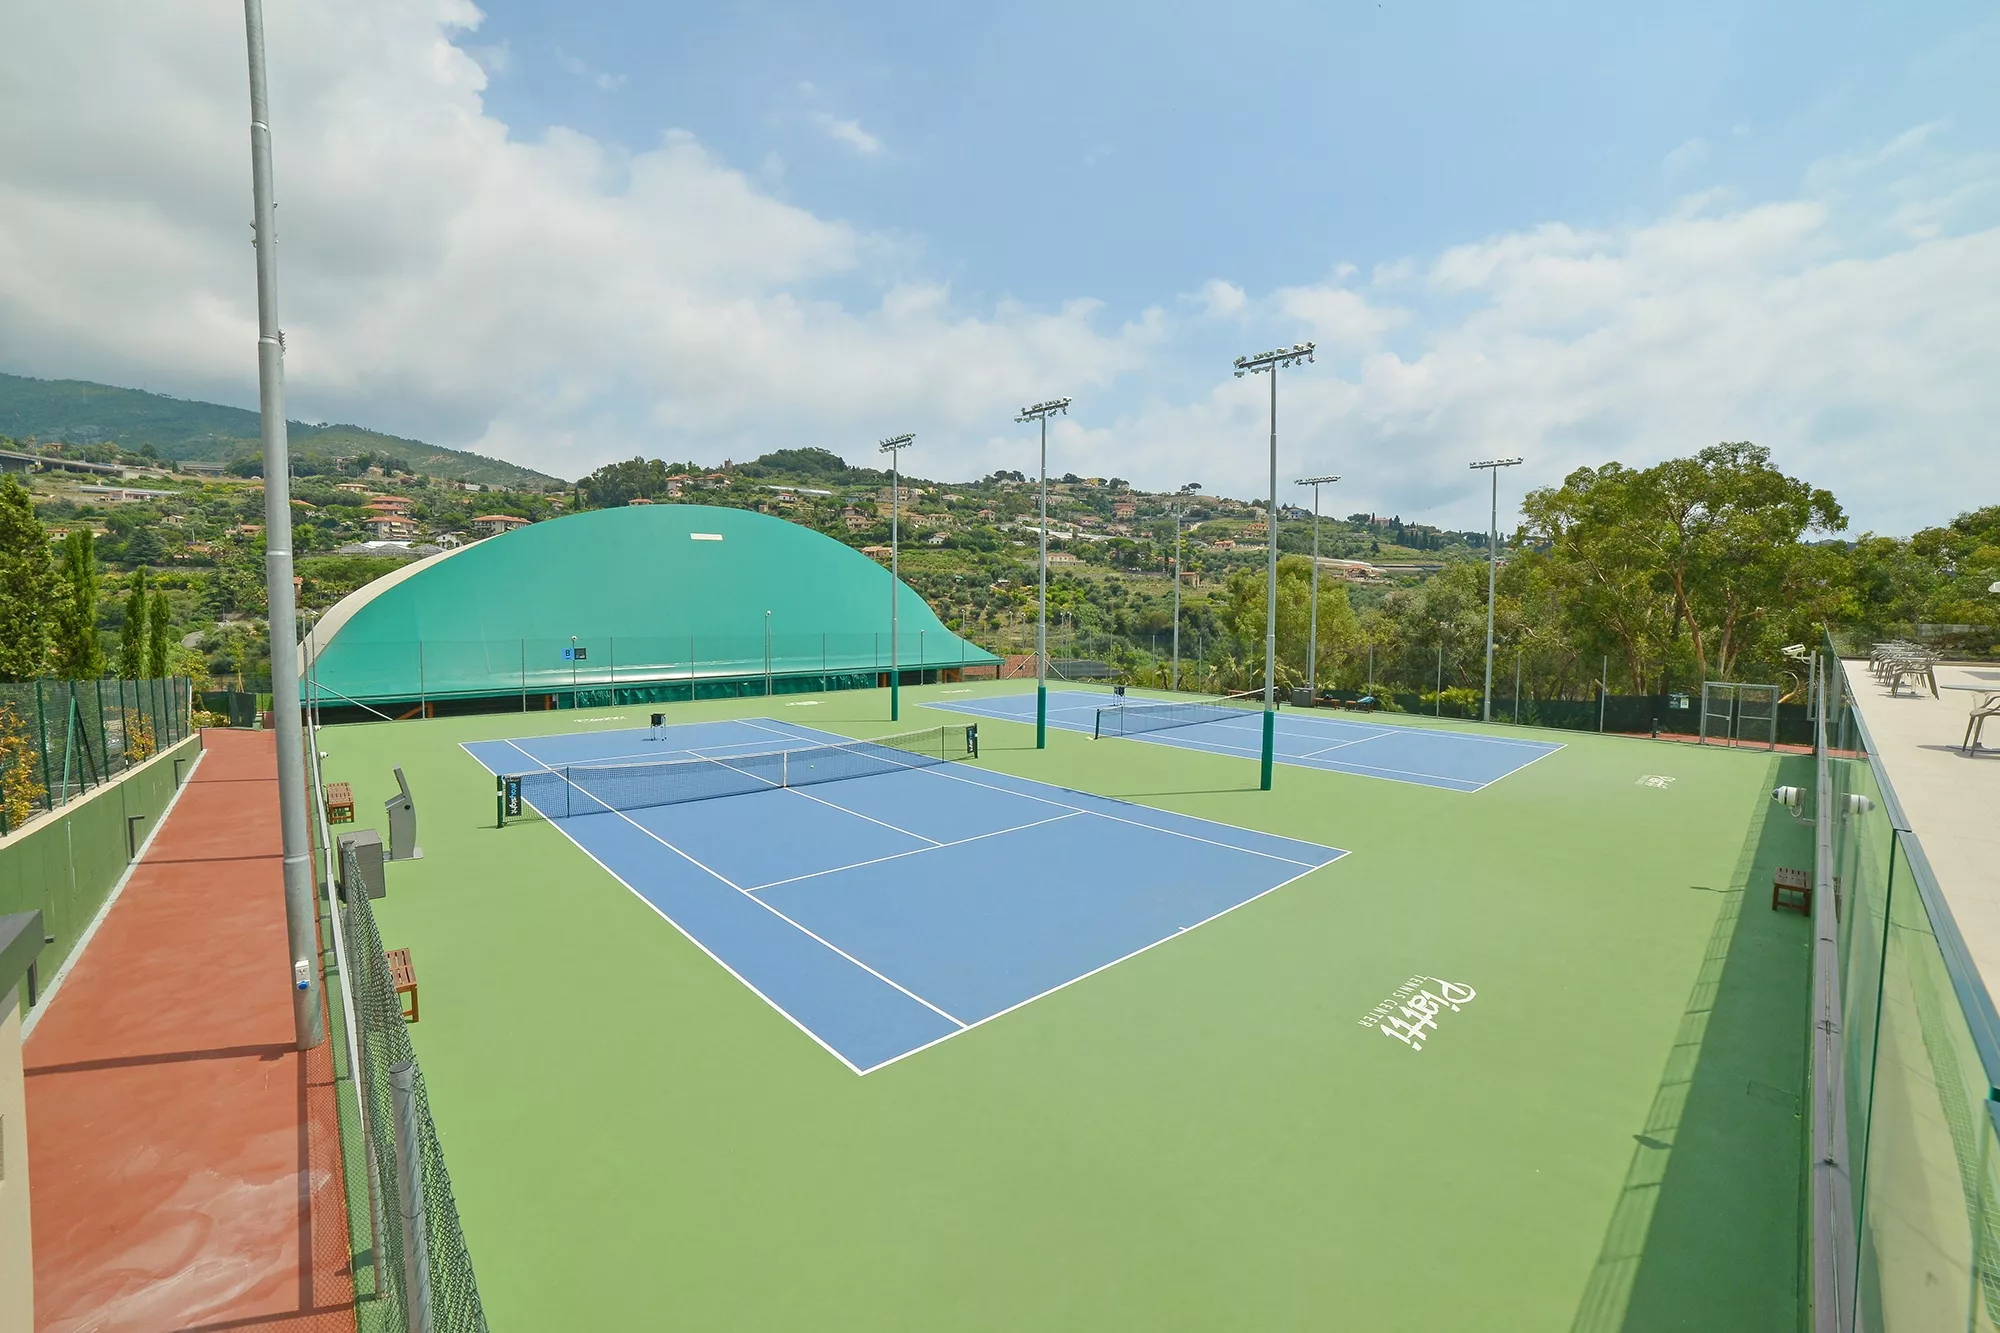 Piatti Tennis Academy in Italy, Europe | Tennis - Rated 1